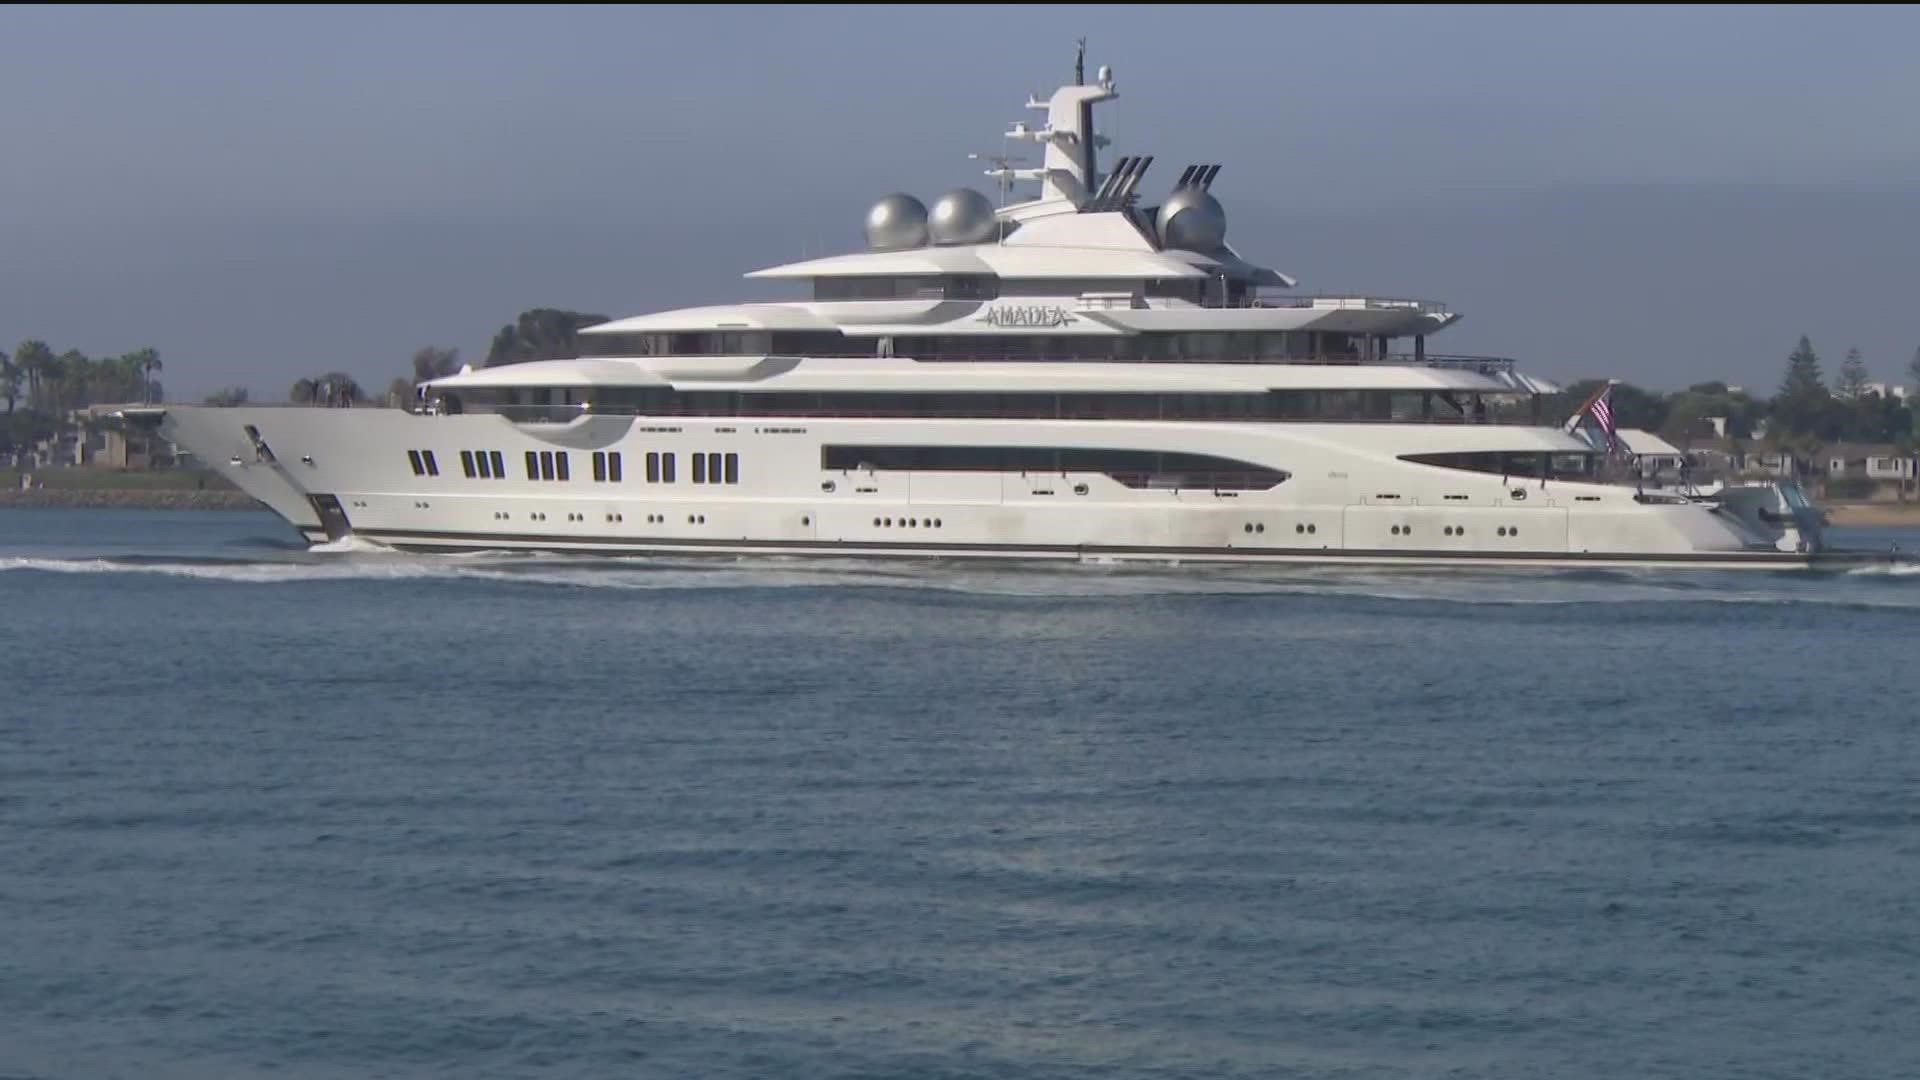 The Department of Justice seized the super yacht in May in an effort to put pressure on Russia over the war in Ukraine.